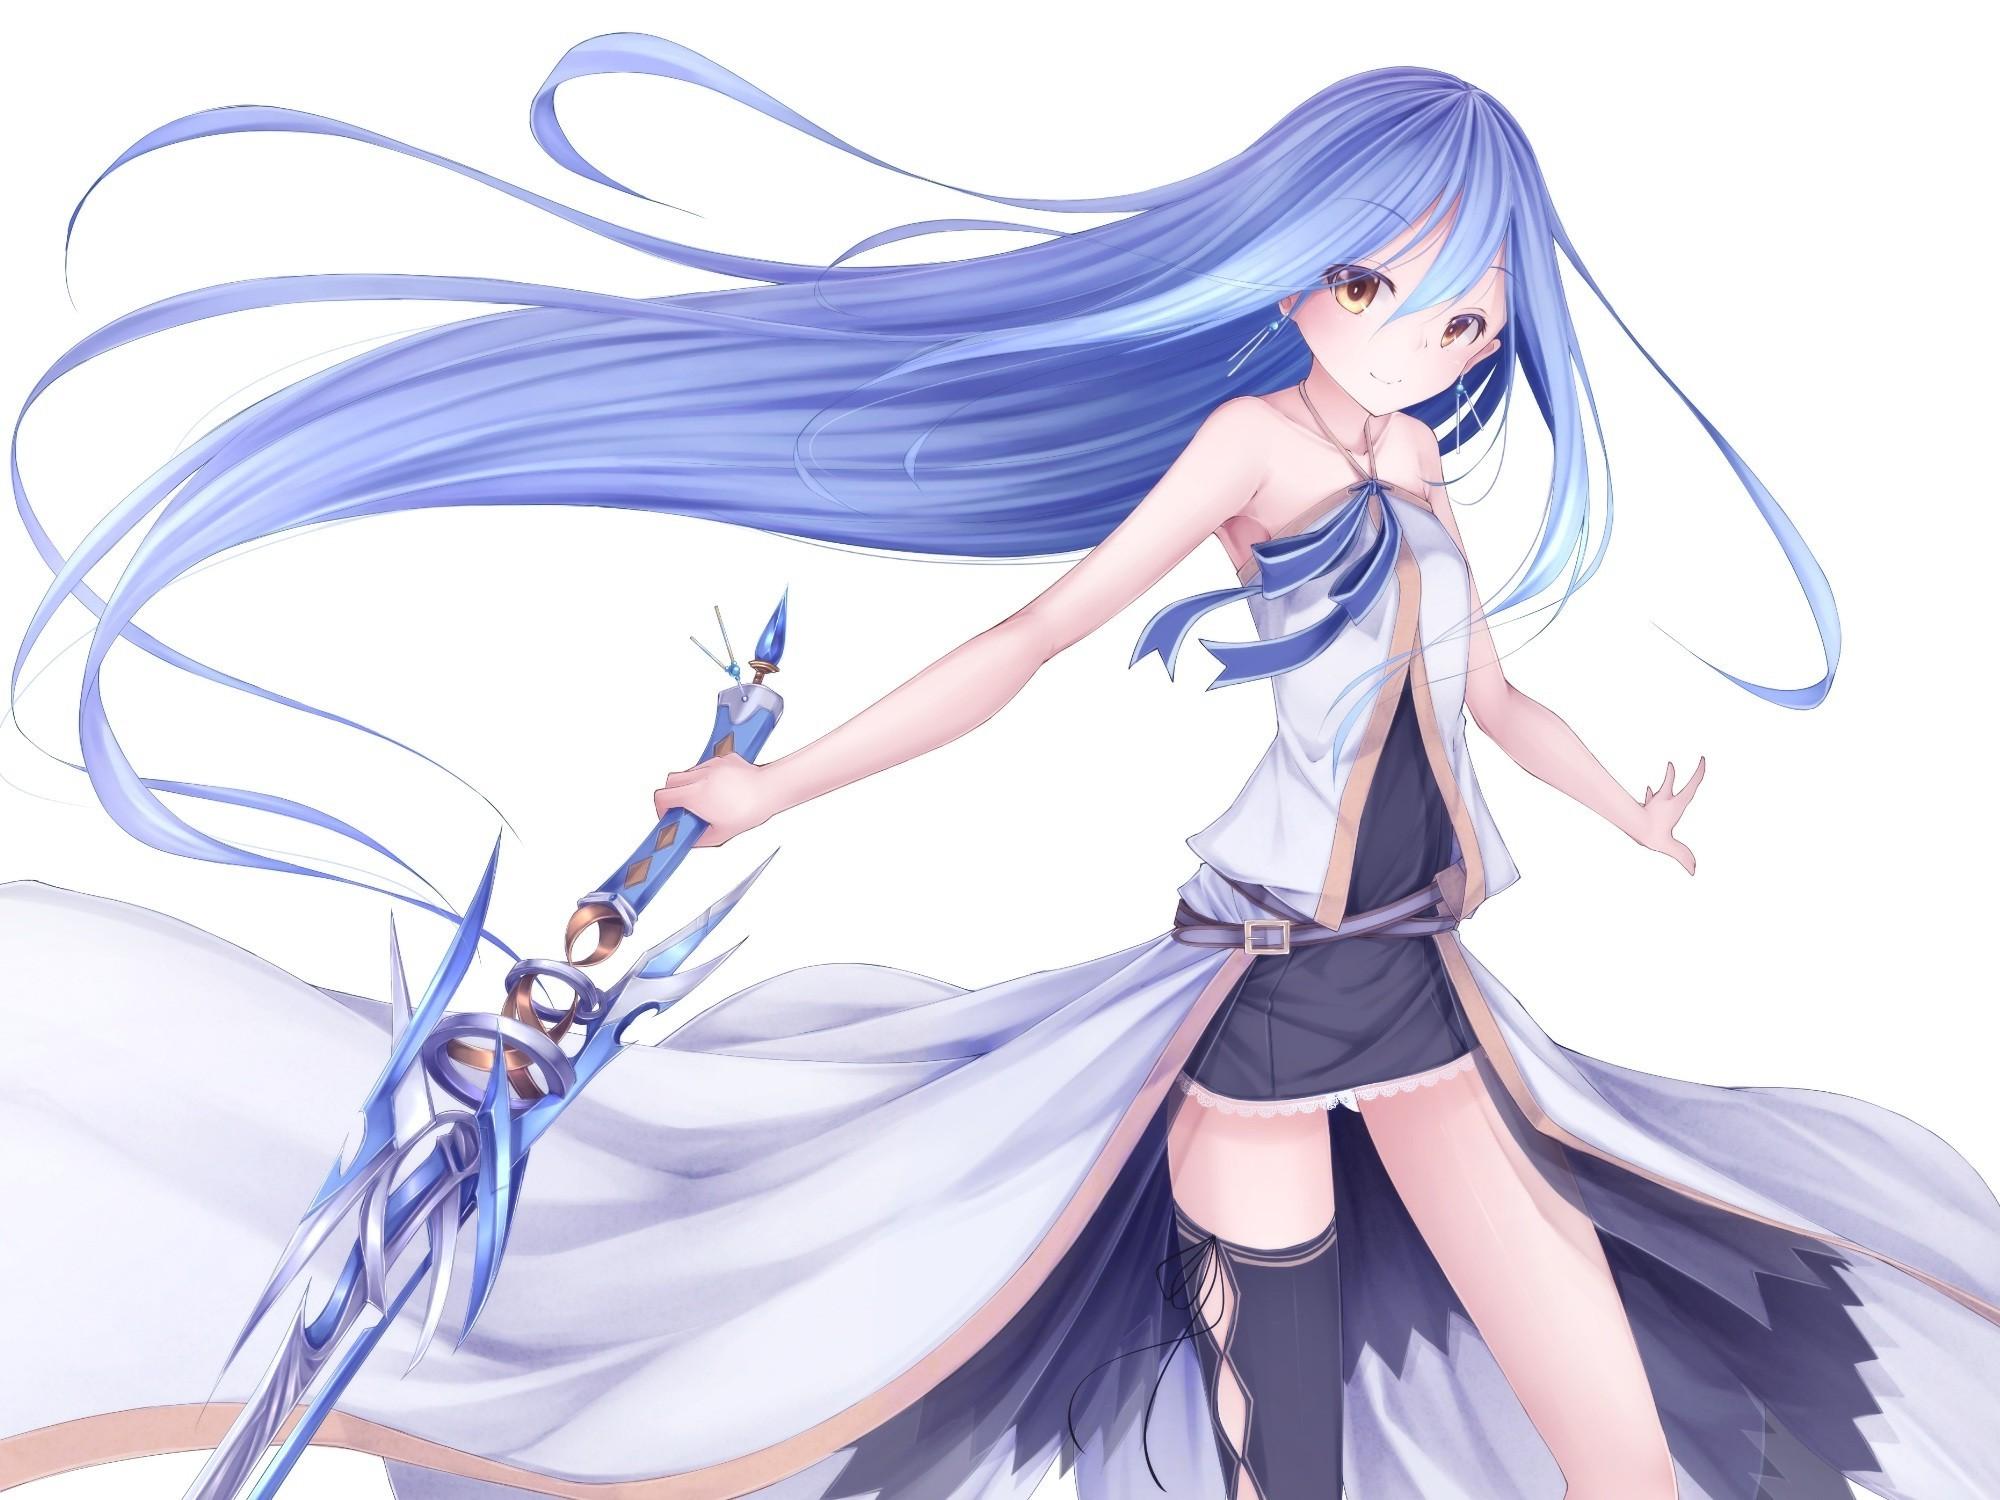 4. "Anime girl with white and blue hair" - wide 2